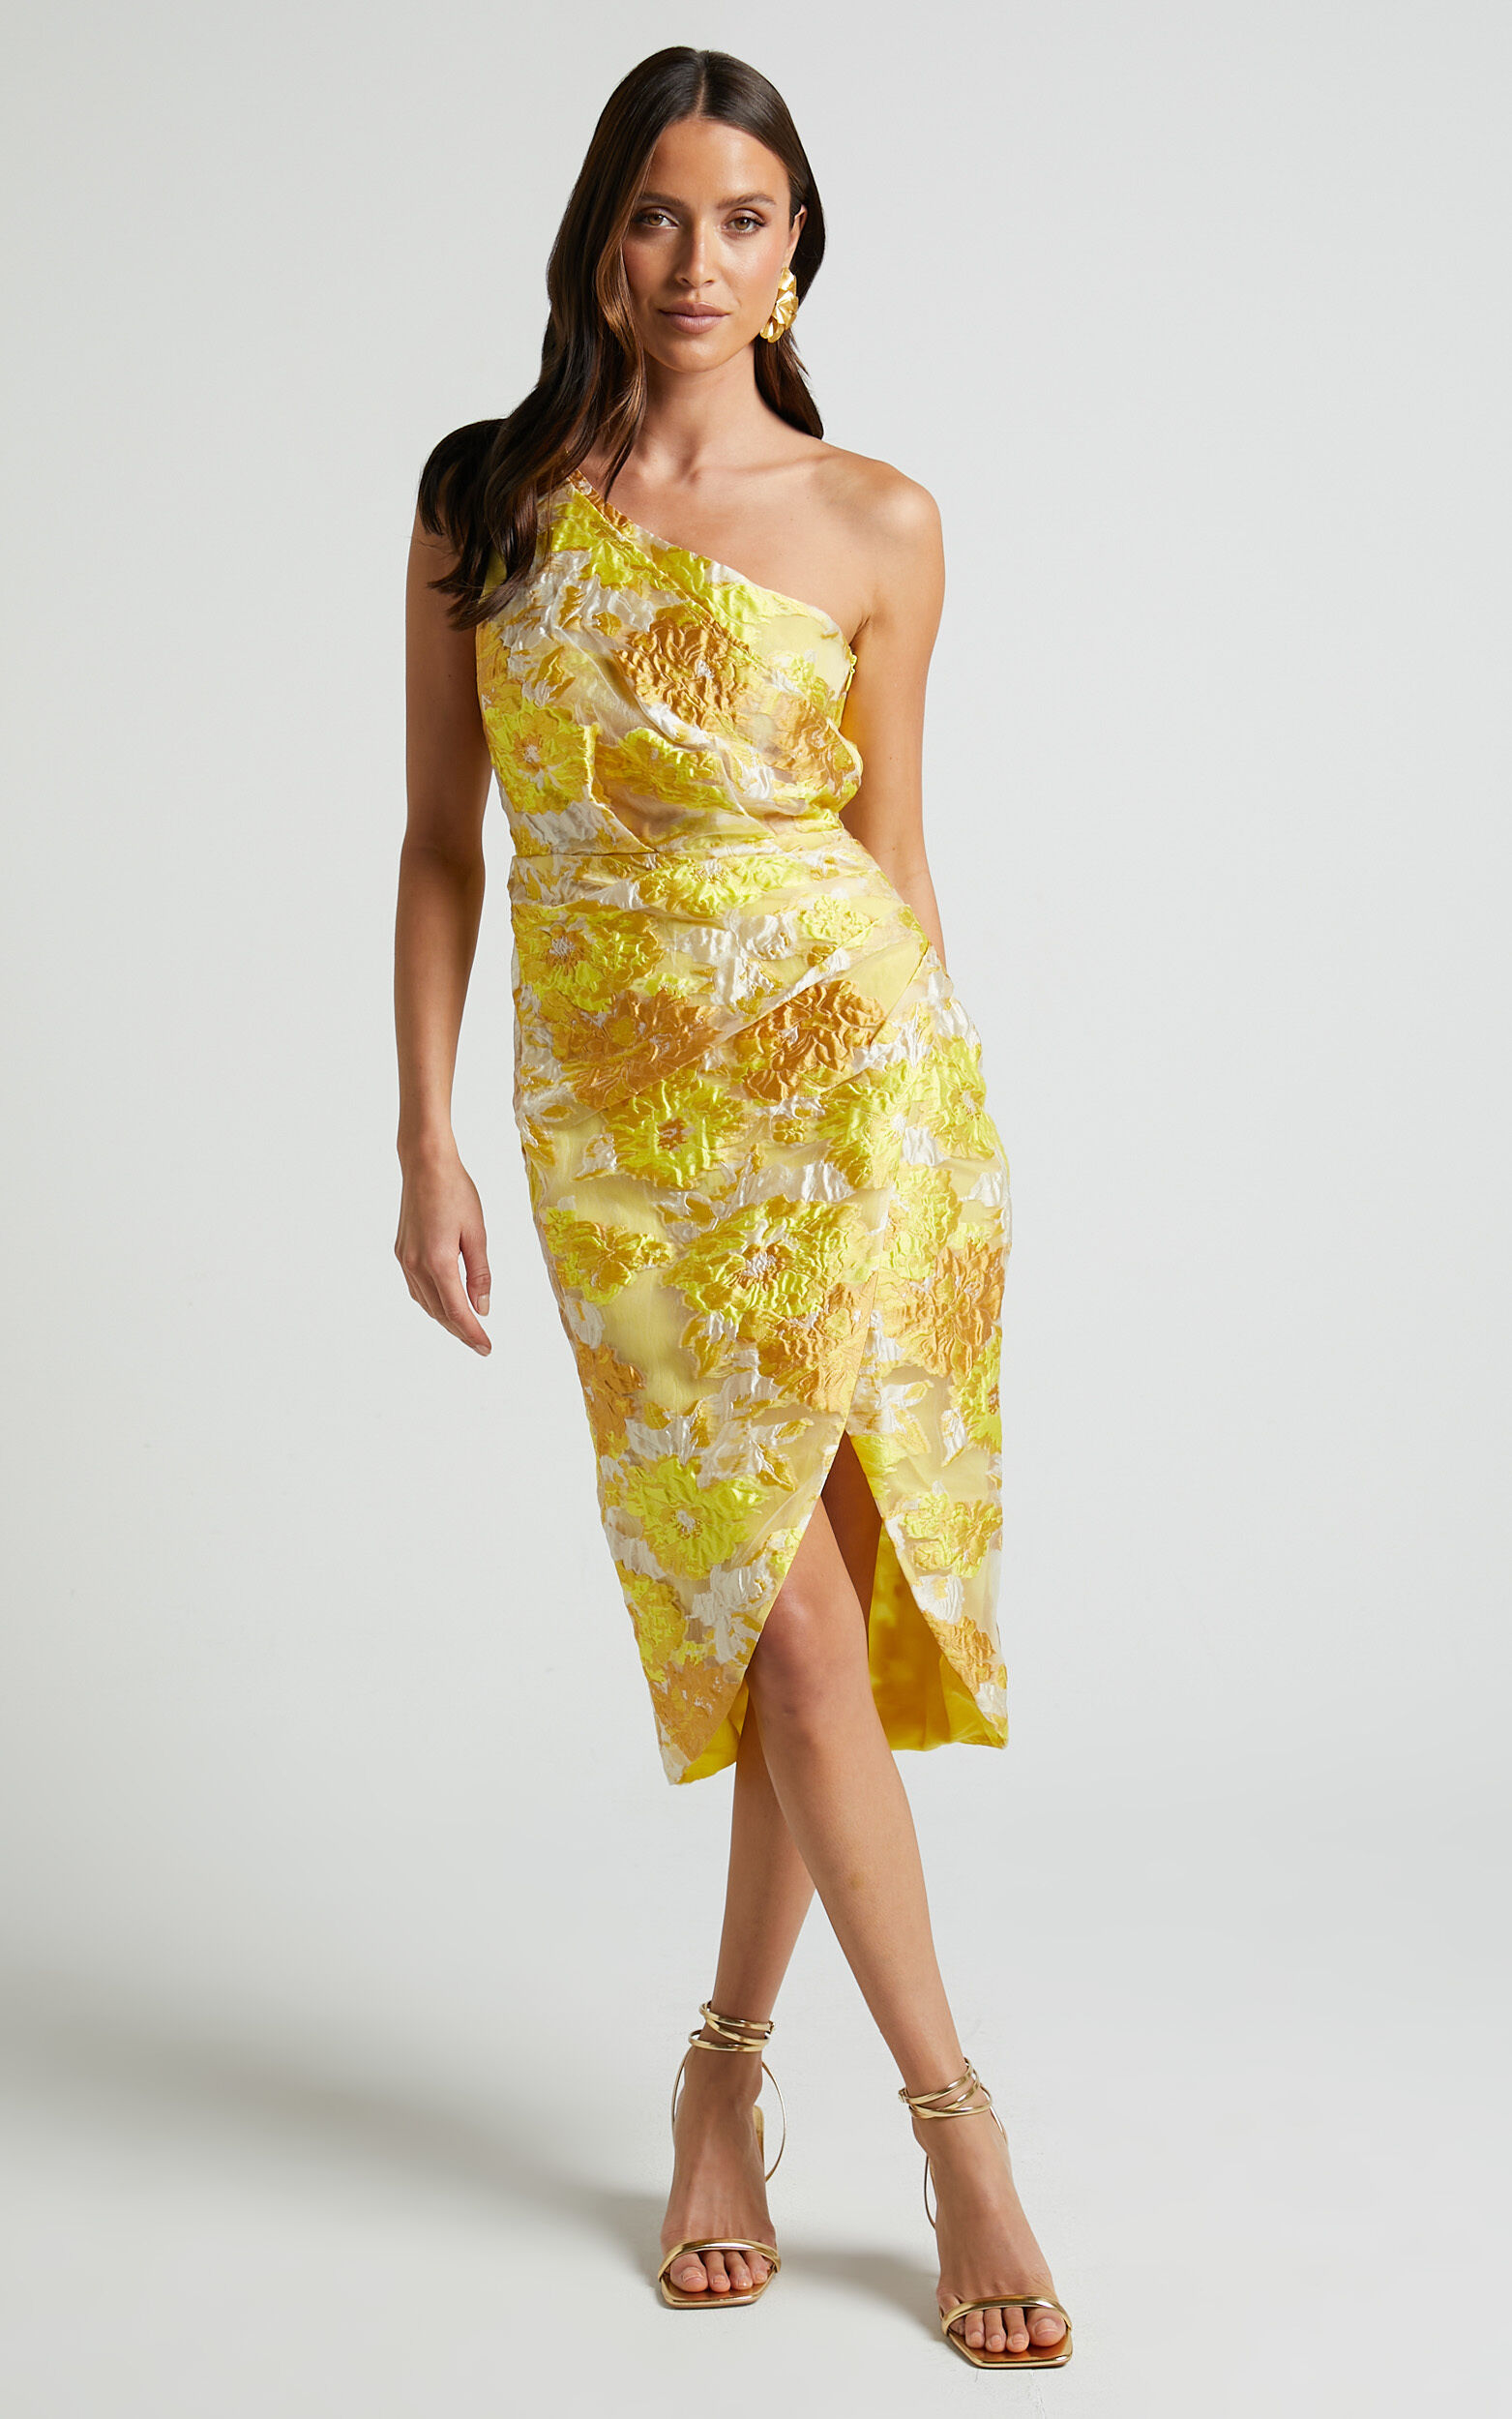 Brailey Midi Dress - One Shoulder Wrap Dress in Yellow Floral - 06, YEL1